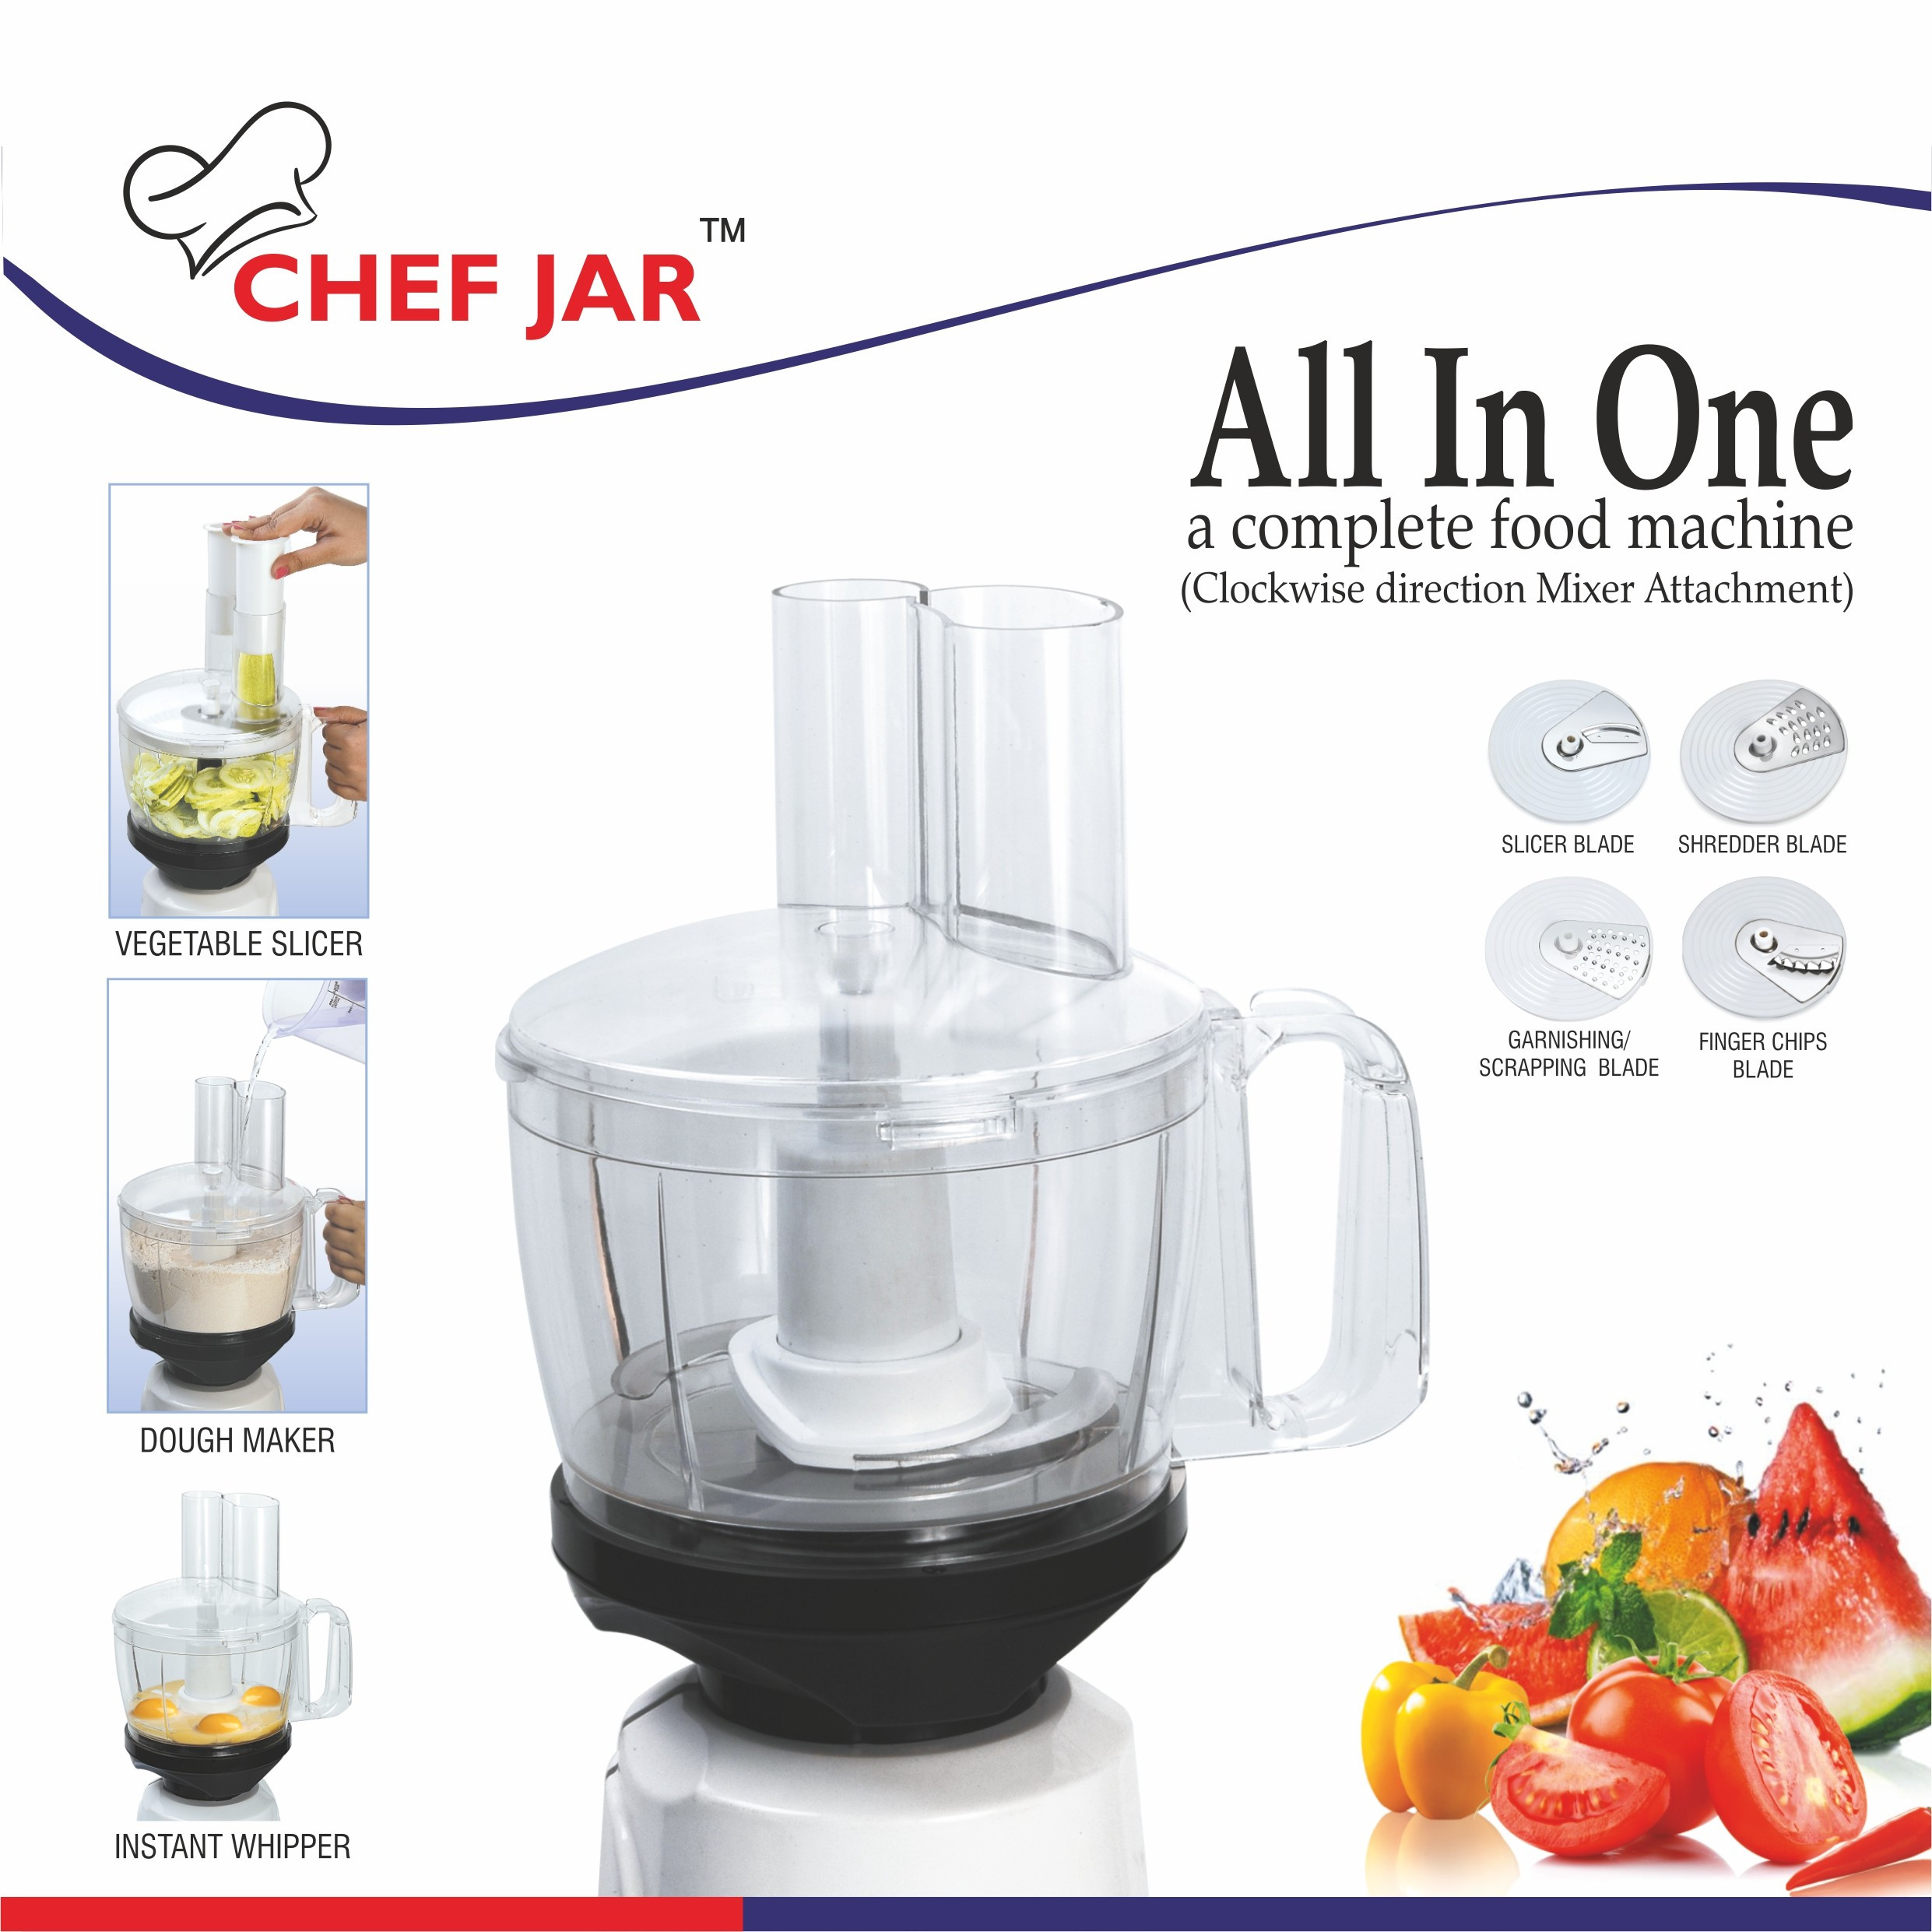 bajaj-bravo-plus-500w-indian-mixer-grinder-with-special-chef-jar-stainless-steel-jars-indian-mixer-grinder-spice-coffee-grinder-110v-for-use-in-canada-usa